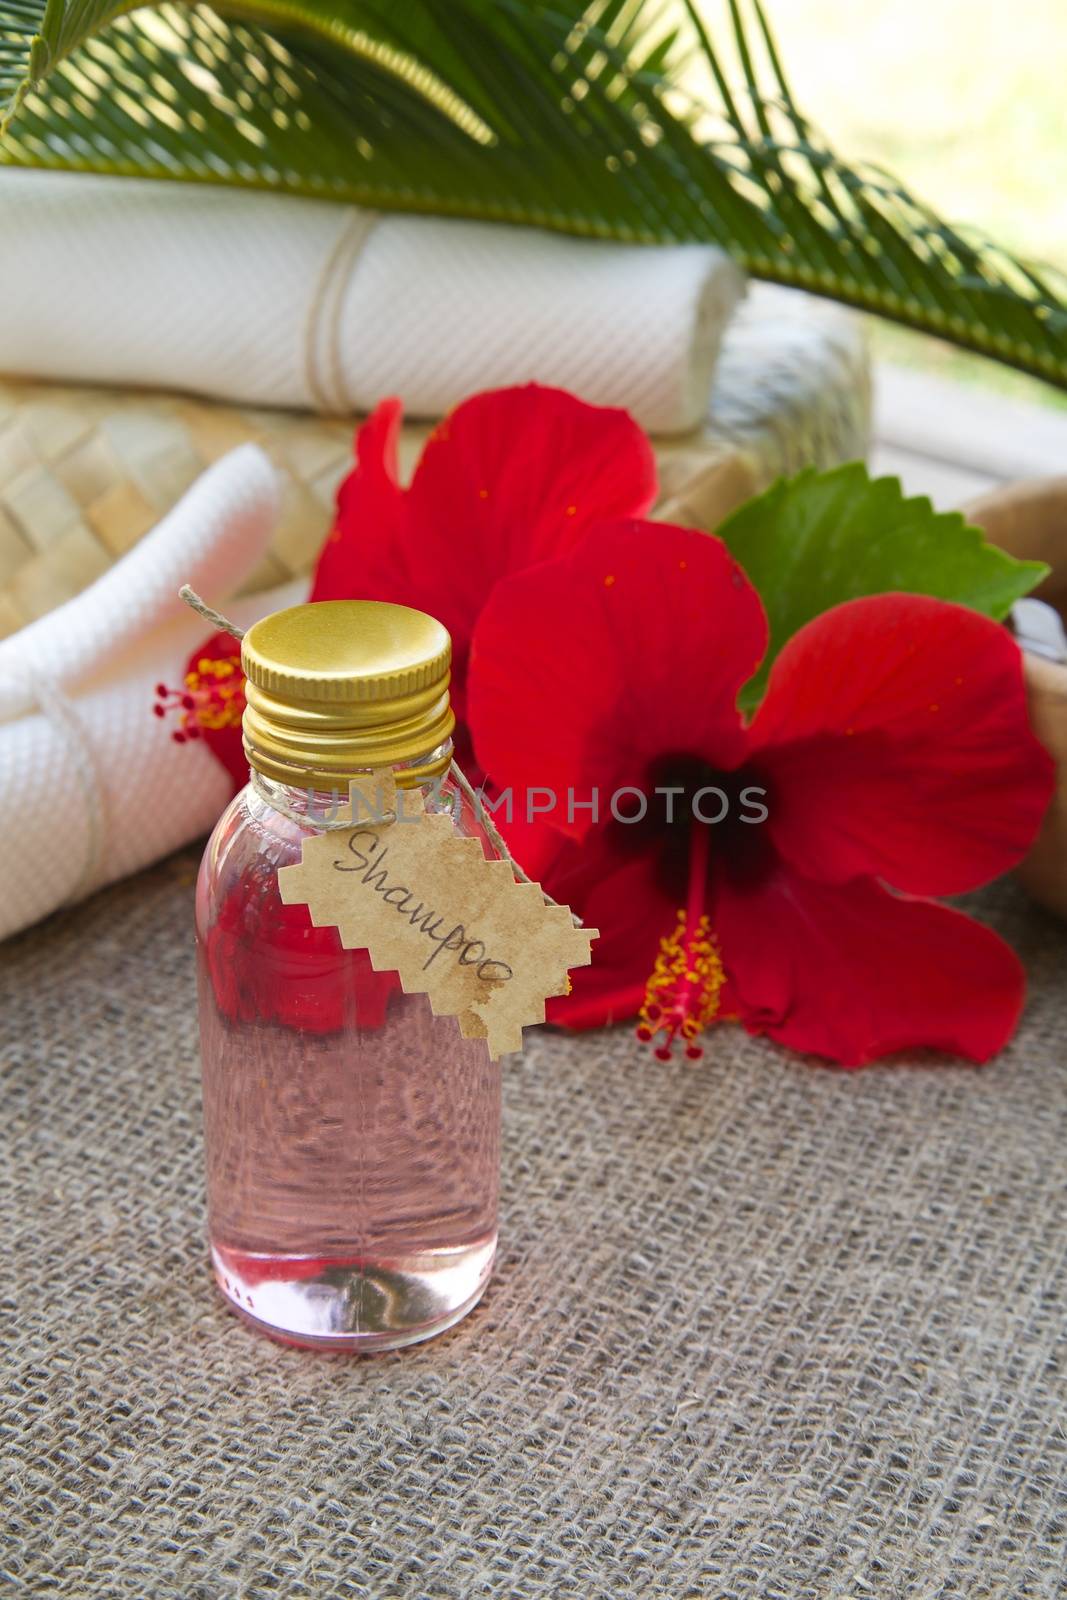 Hibiscus essential oil by tolikoff_photography